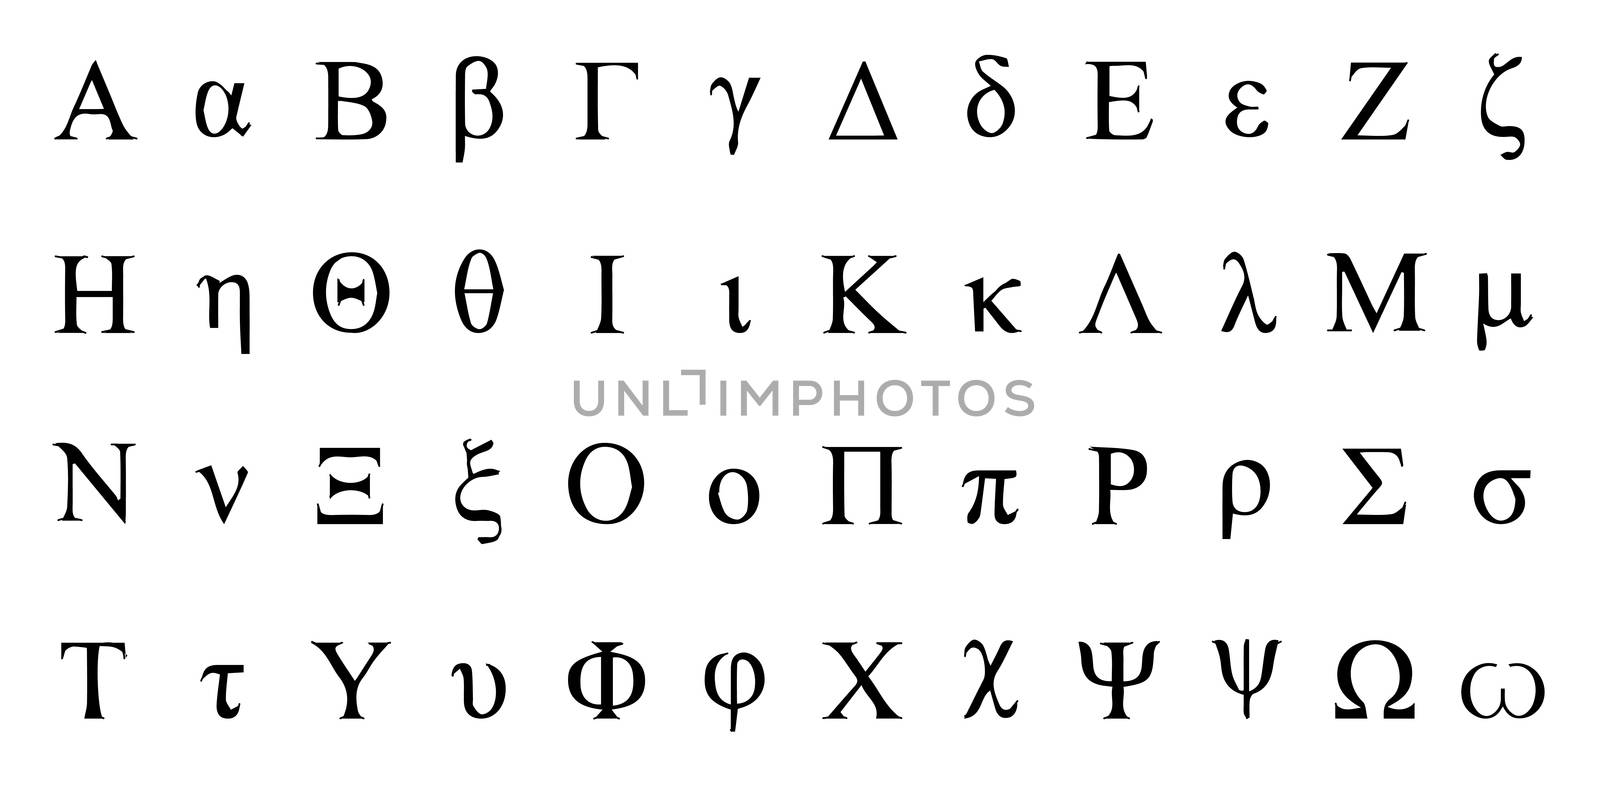 The Greek alphabet in large and small letters isolated on white